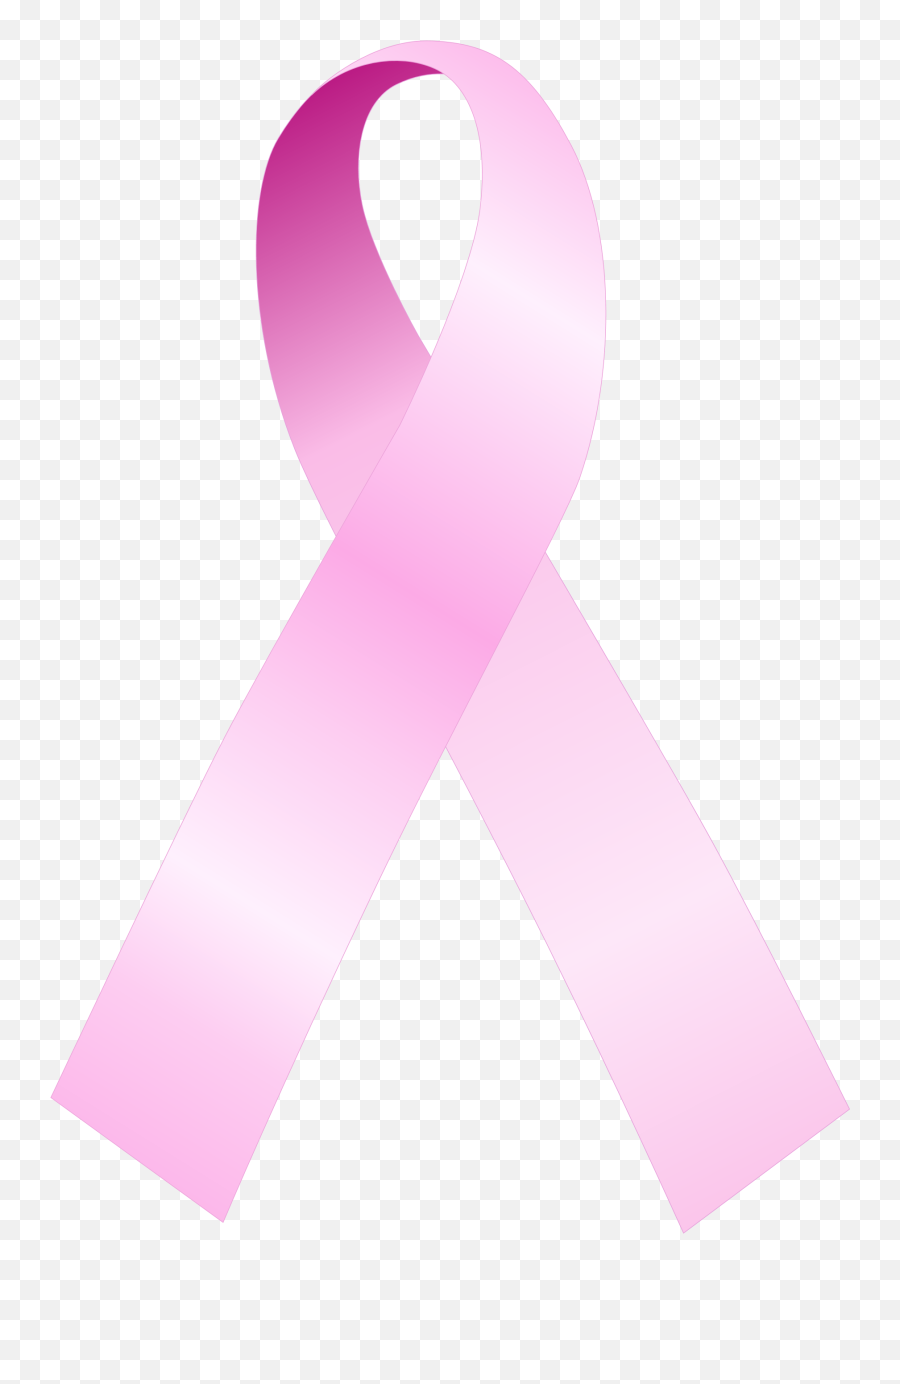 Free Breast Cancer Ribbon Download - Breast Cancer Awareness Ribbon With Black Background Emoji,Pink Breast Cancer Ribbon Emoji